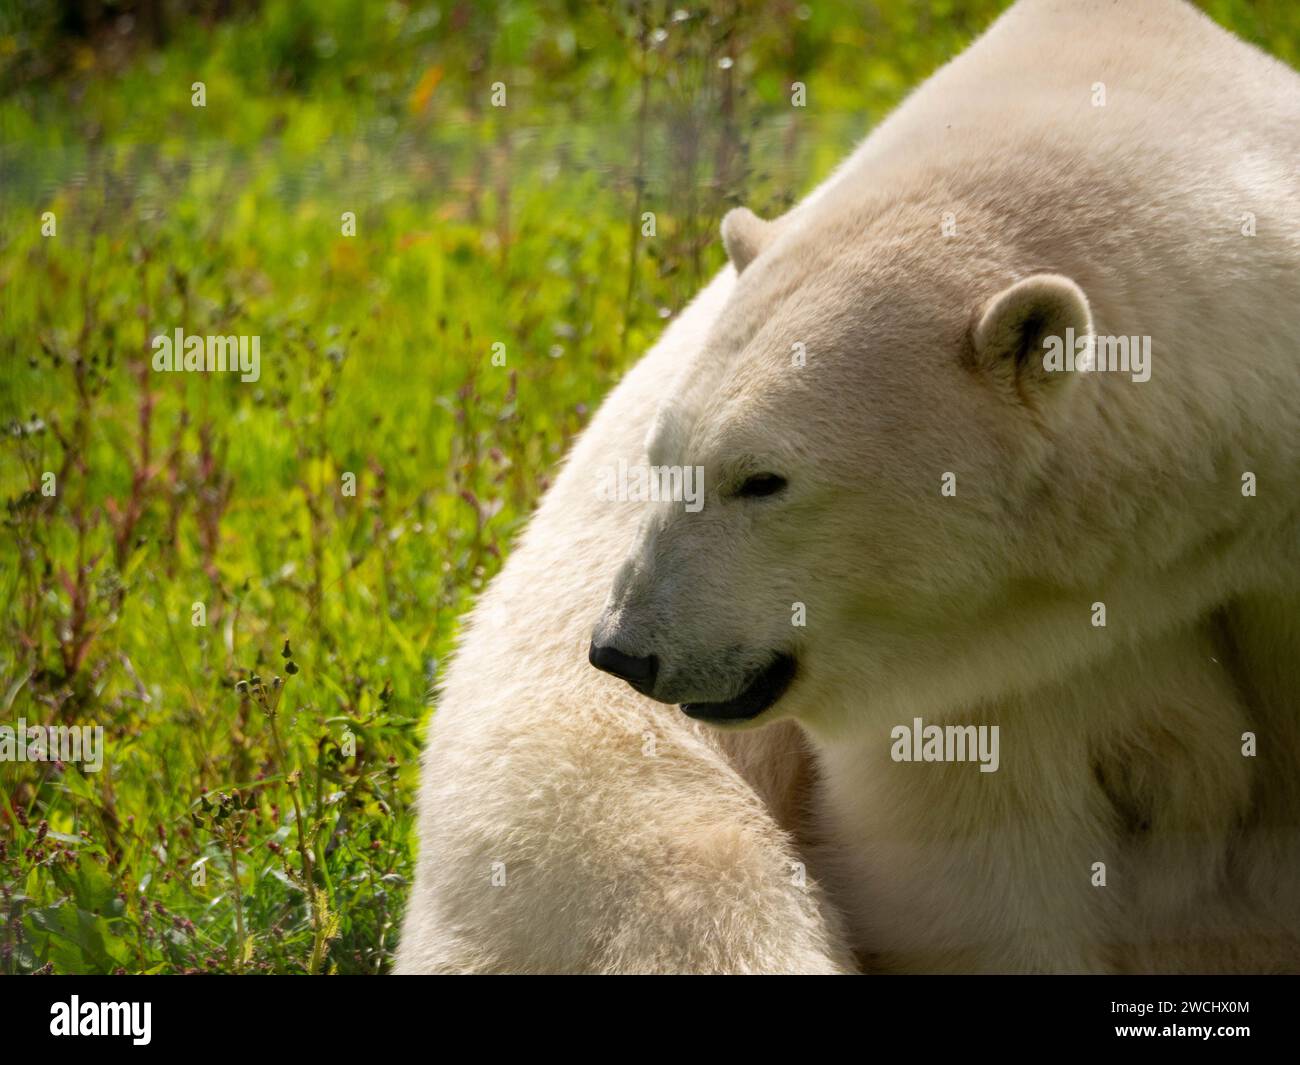 Polar Bear smiling in the warmth of the sun in its field. Stock Photo